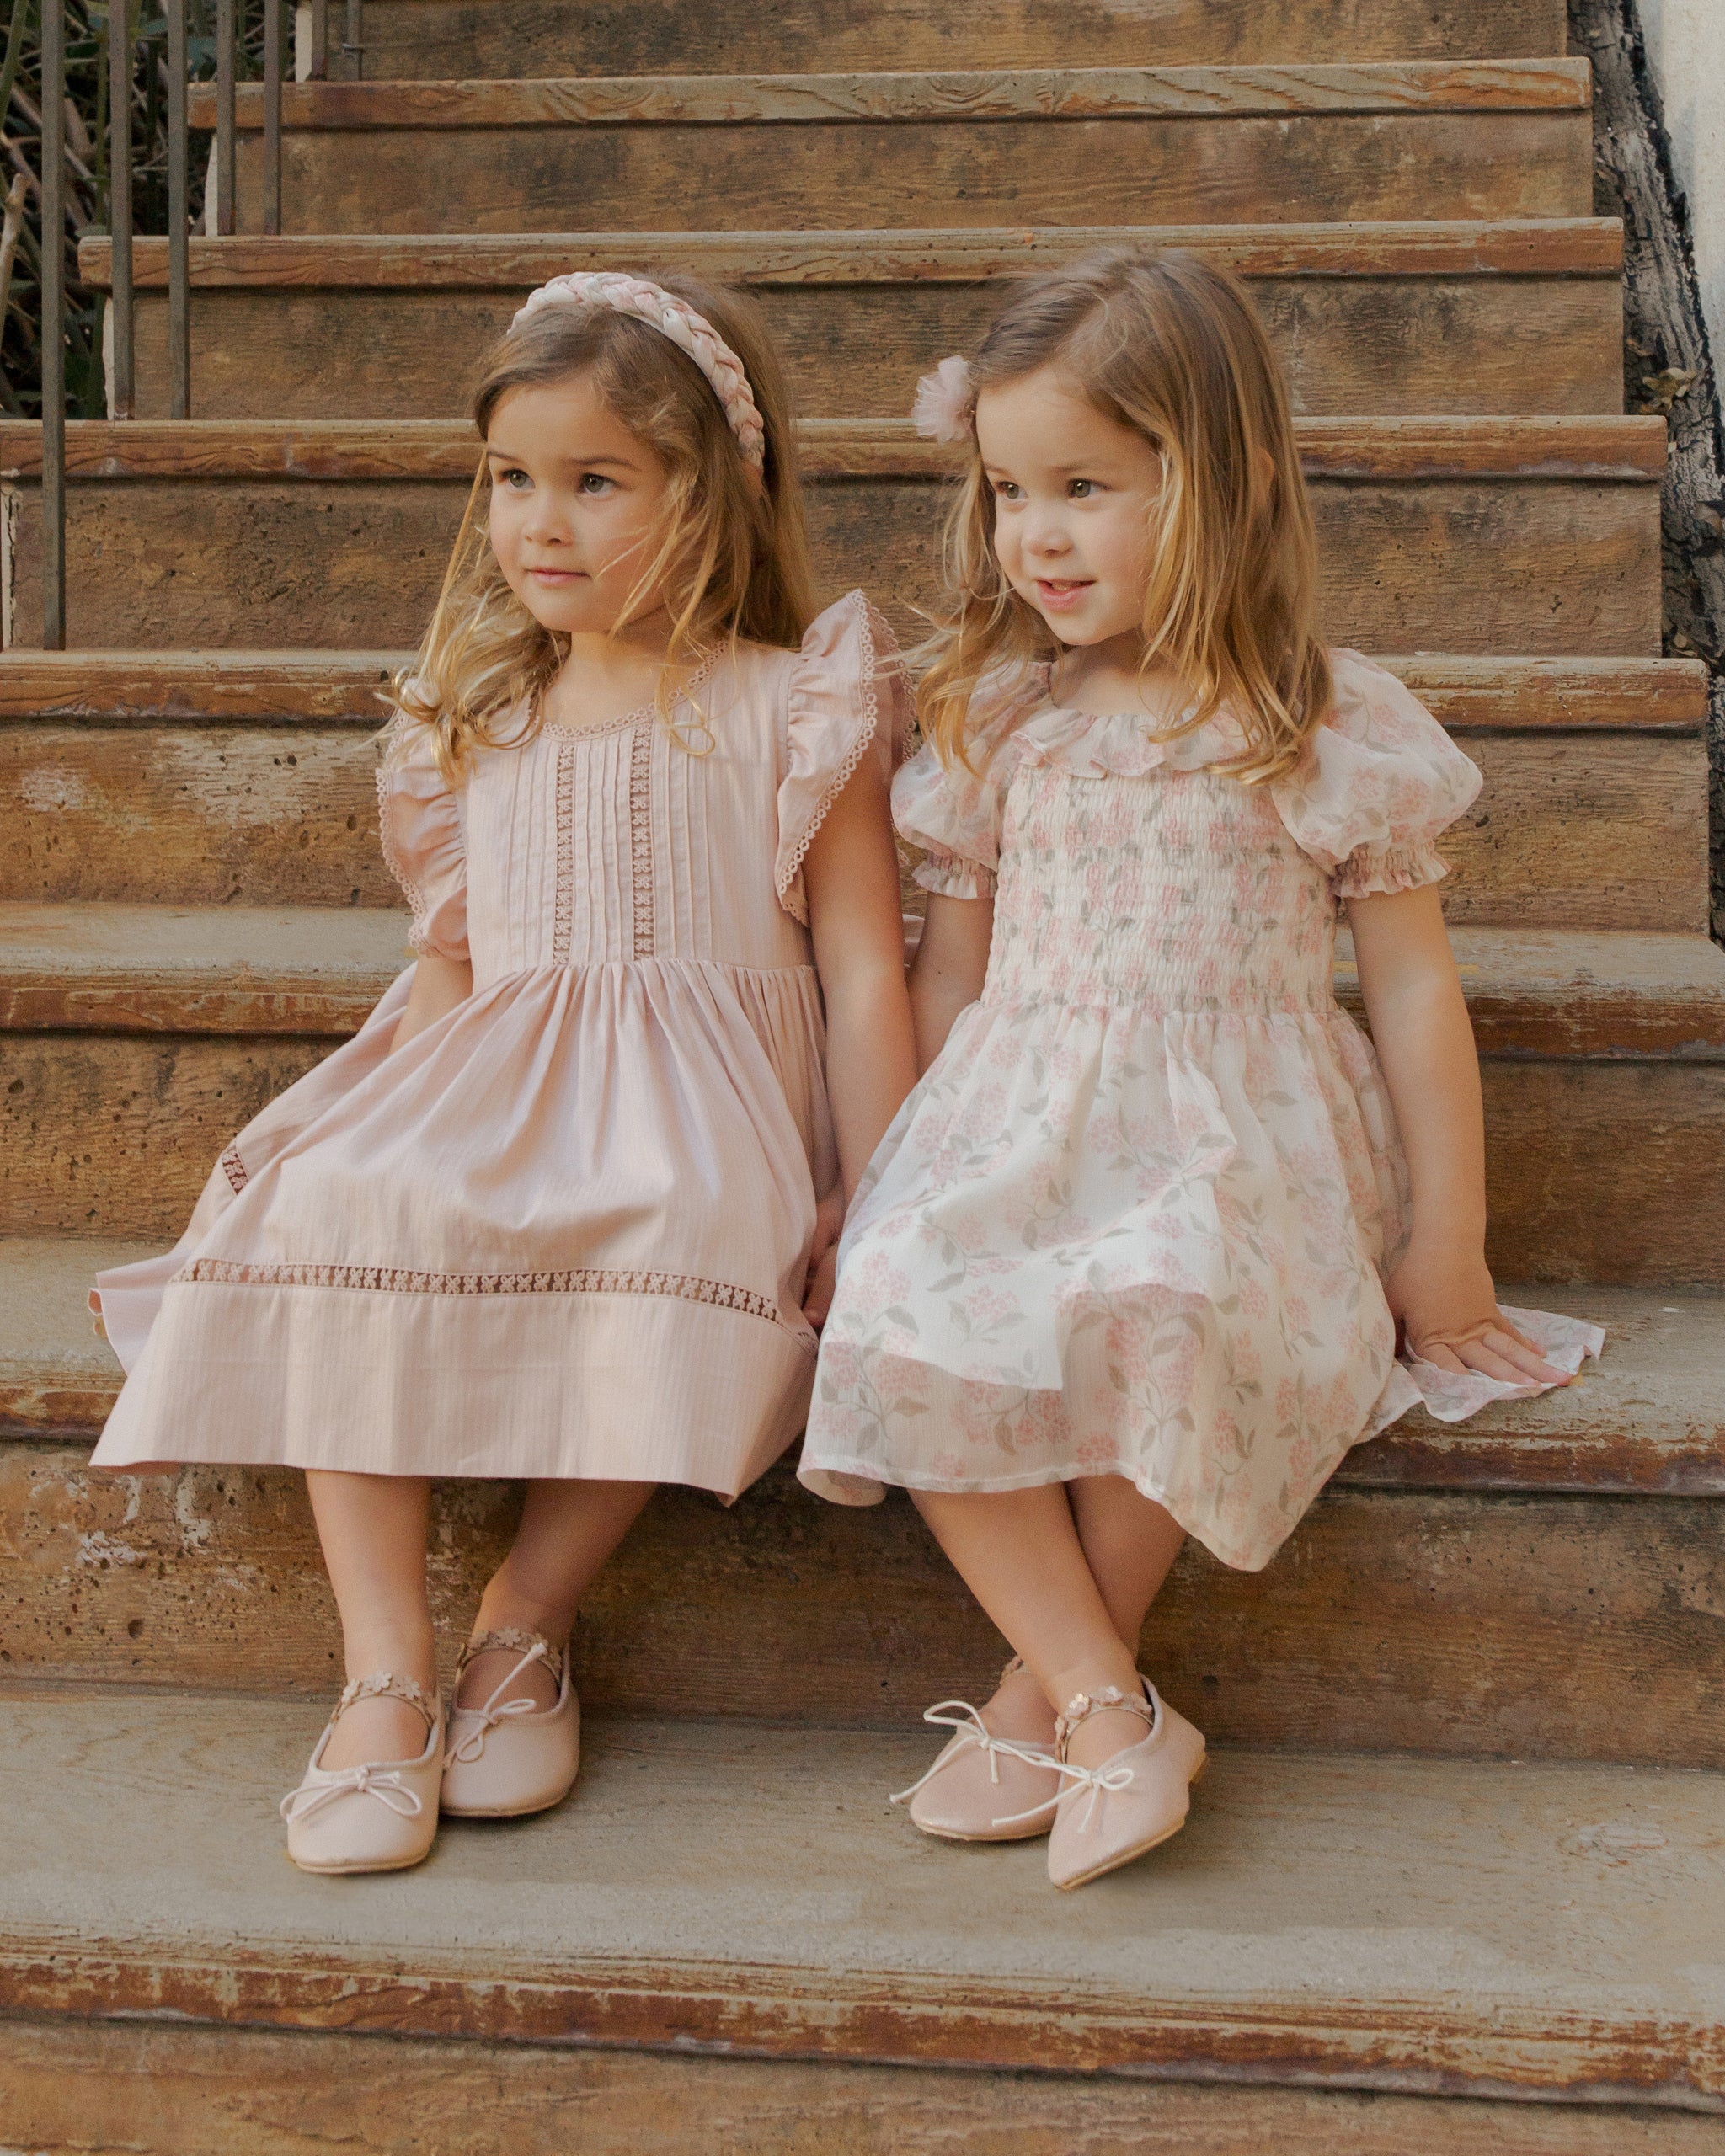 Ballet Flats || Rose - Rylee + Cru | Kids Clothes | Trendy Baby Clothes | Modern Infant Outfits |